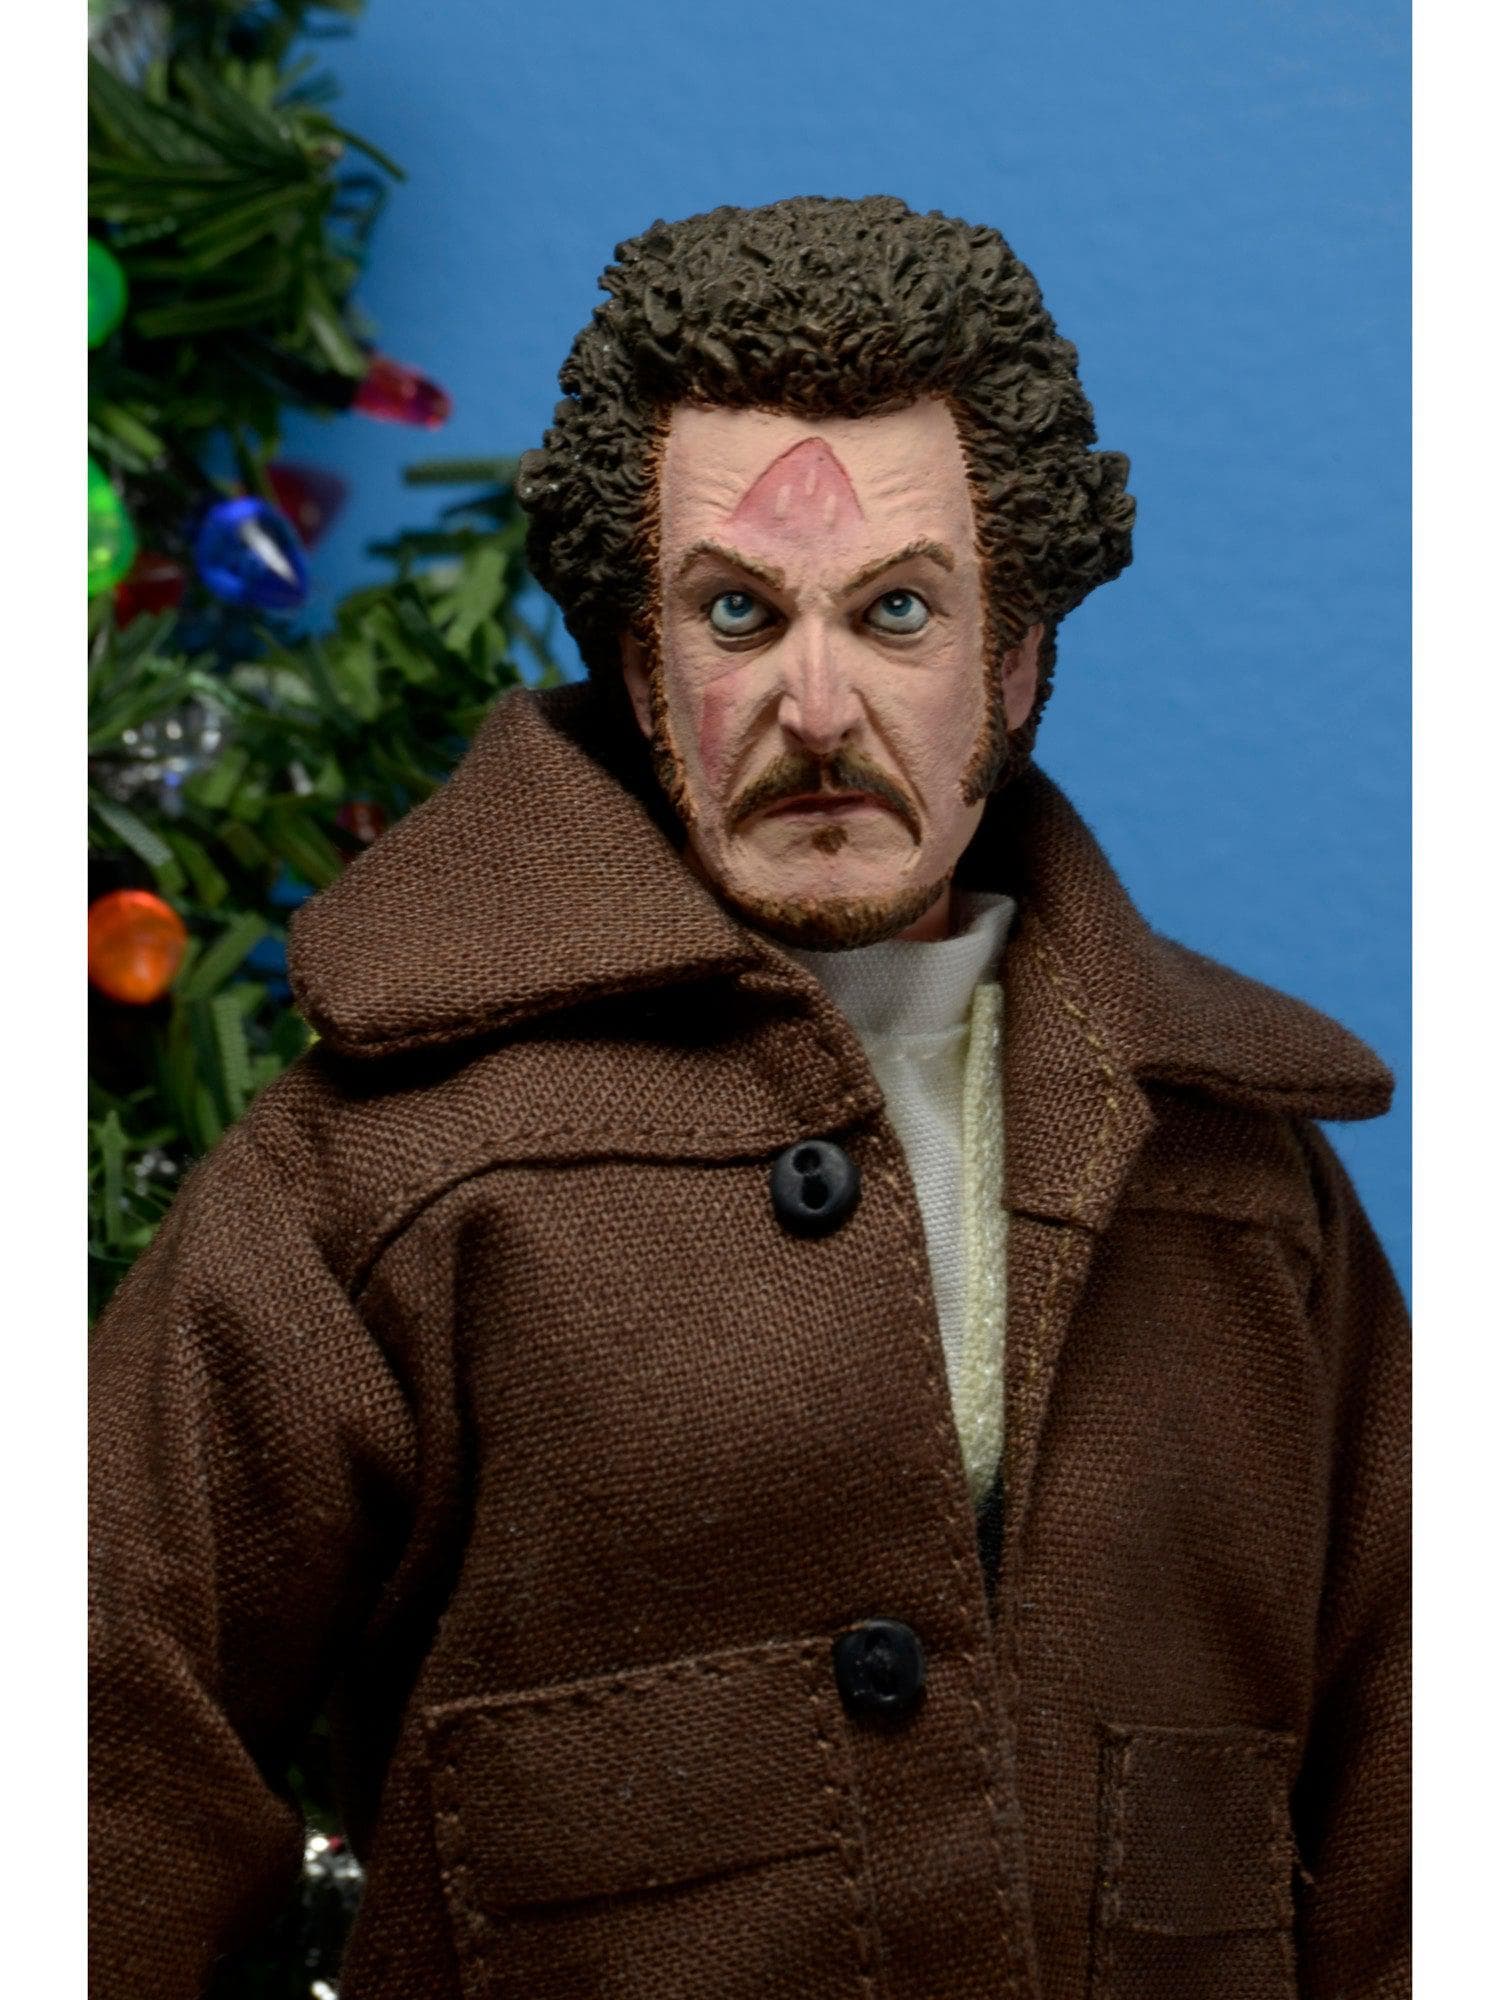 NECA - Home Alone - 8" Scale Clothed Action Figure - Marv - costumes.com